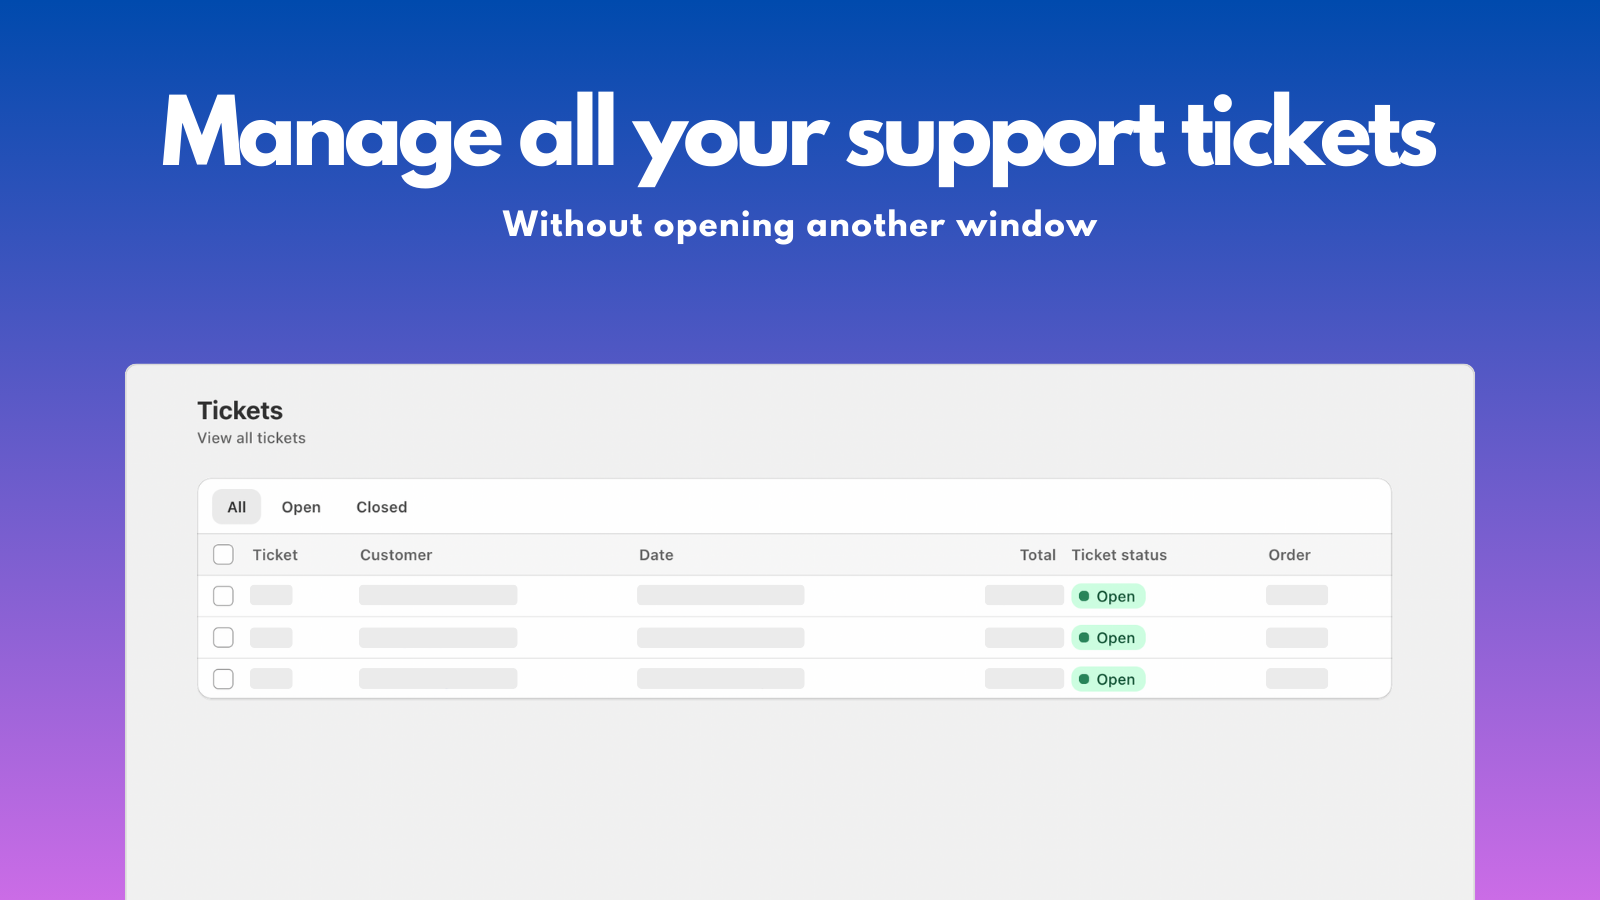 Manage all your support tickets